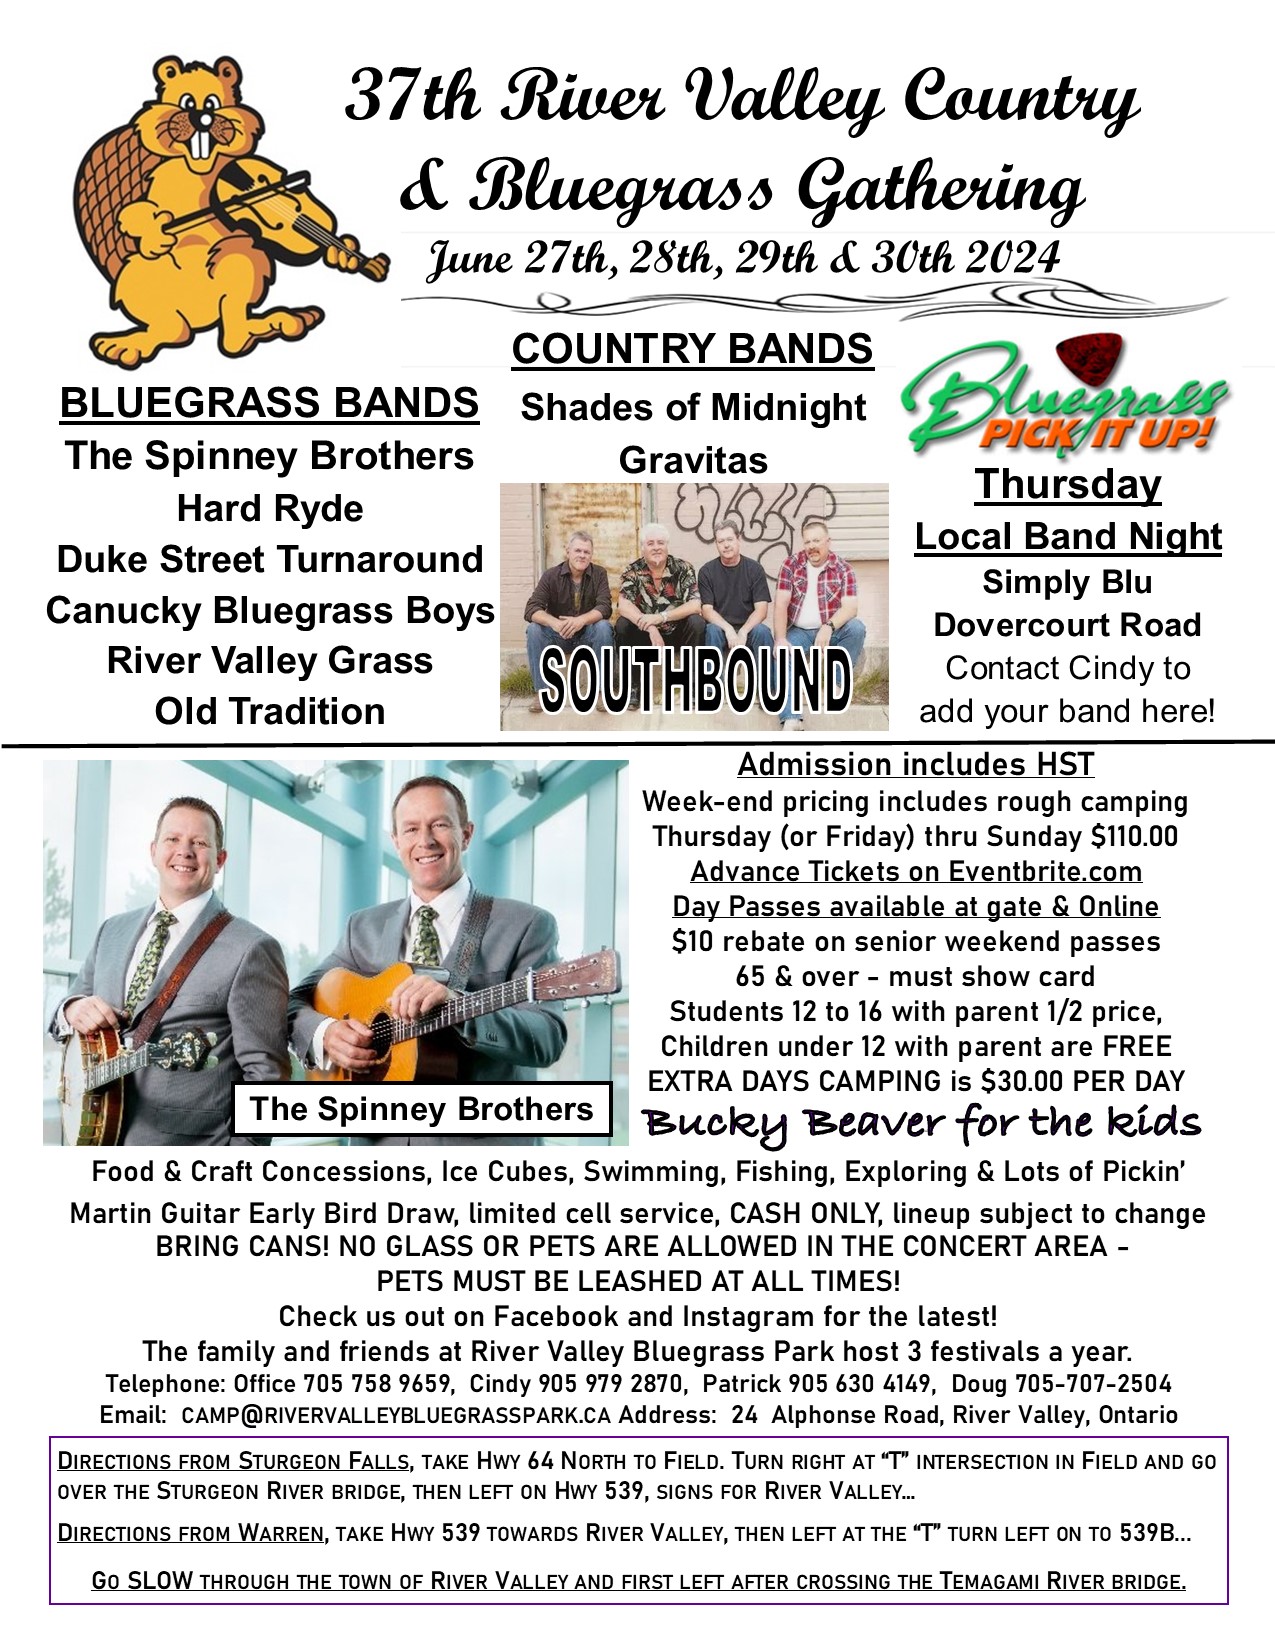 River Valley Country and Bluegrass Festival